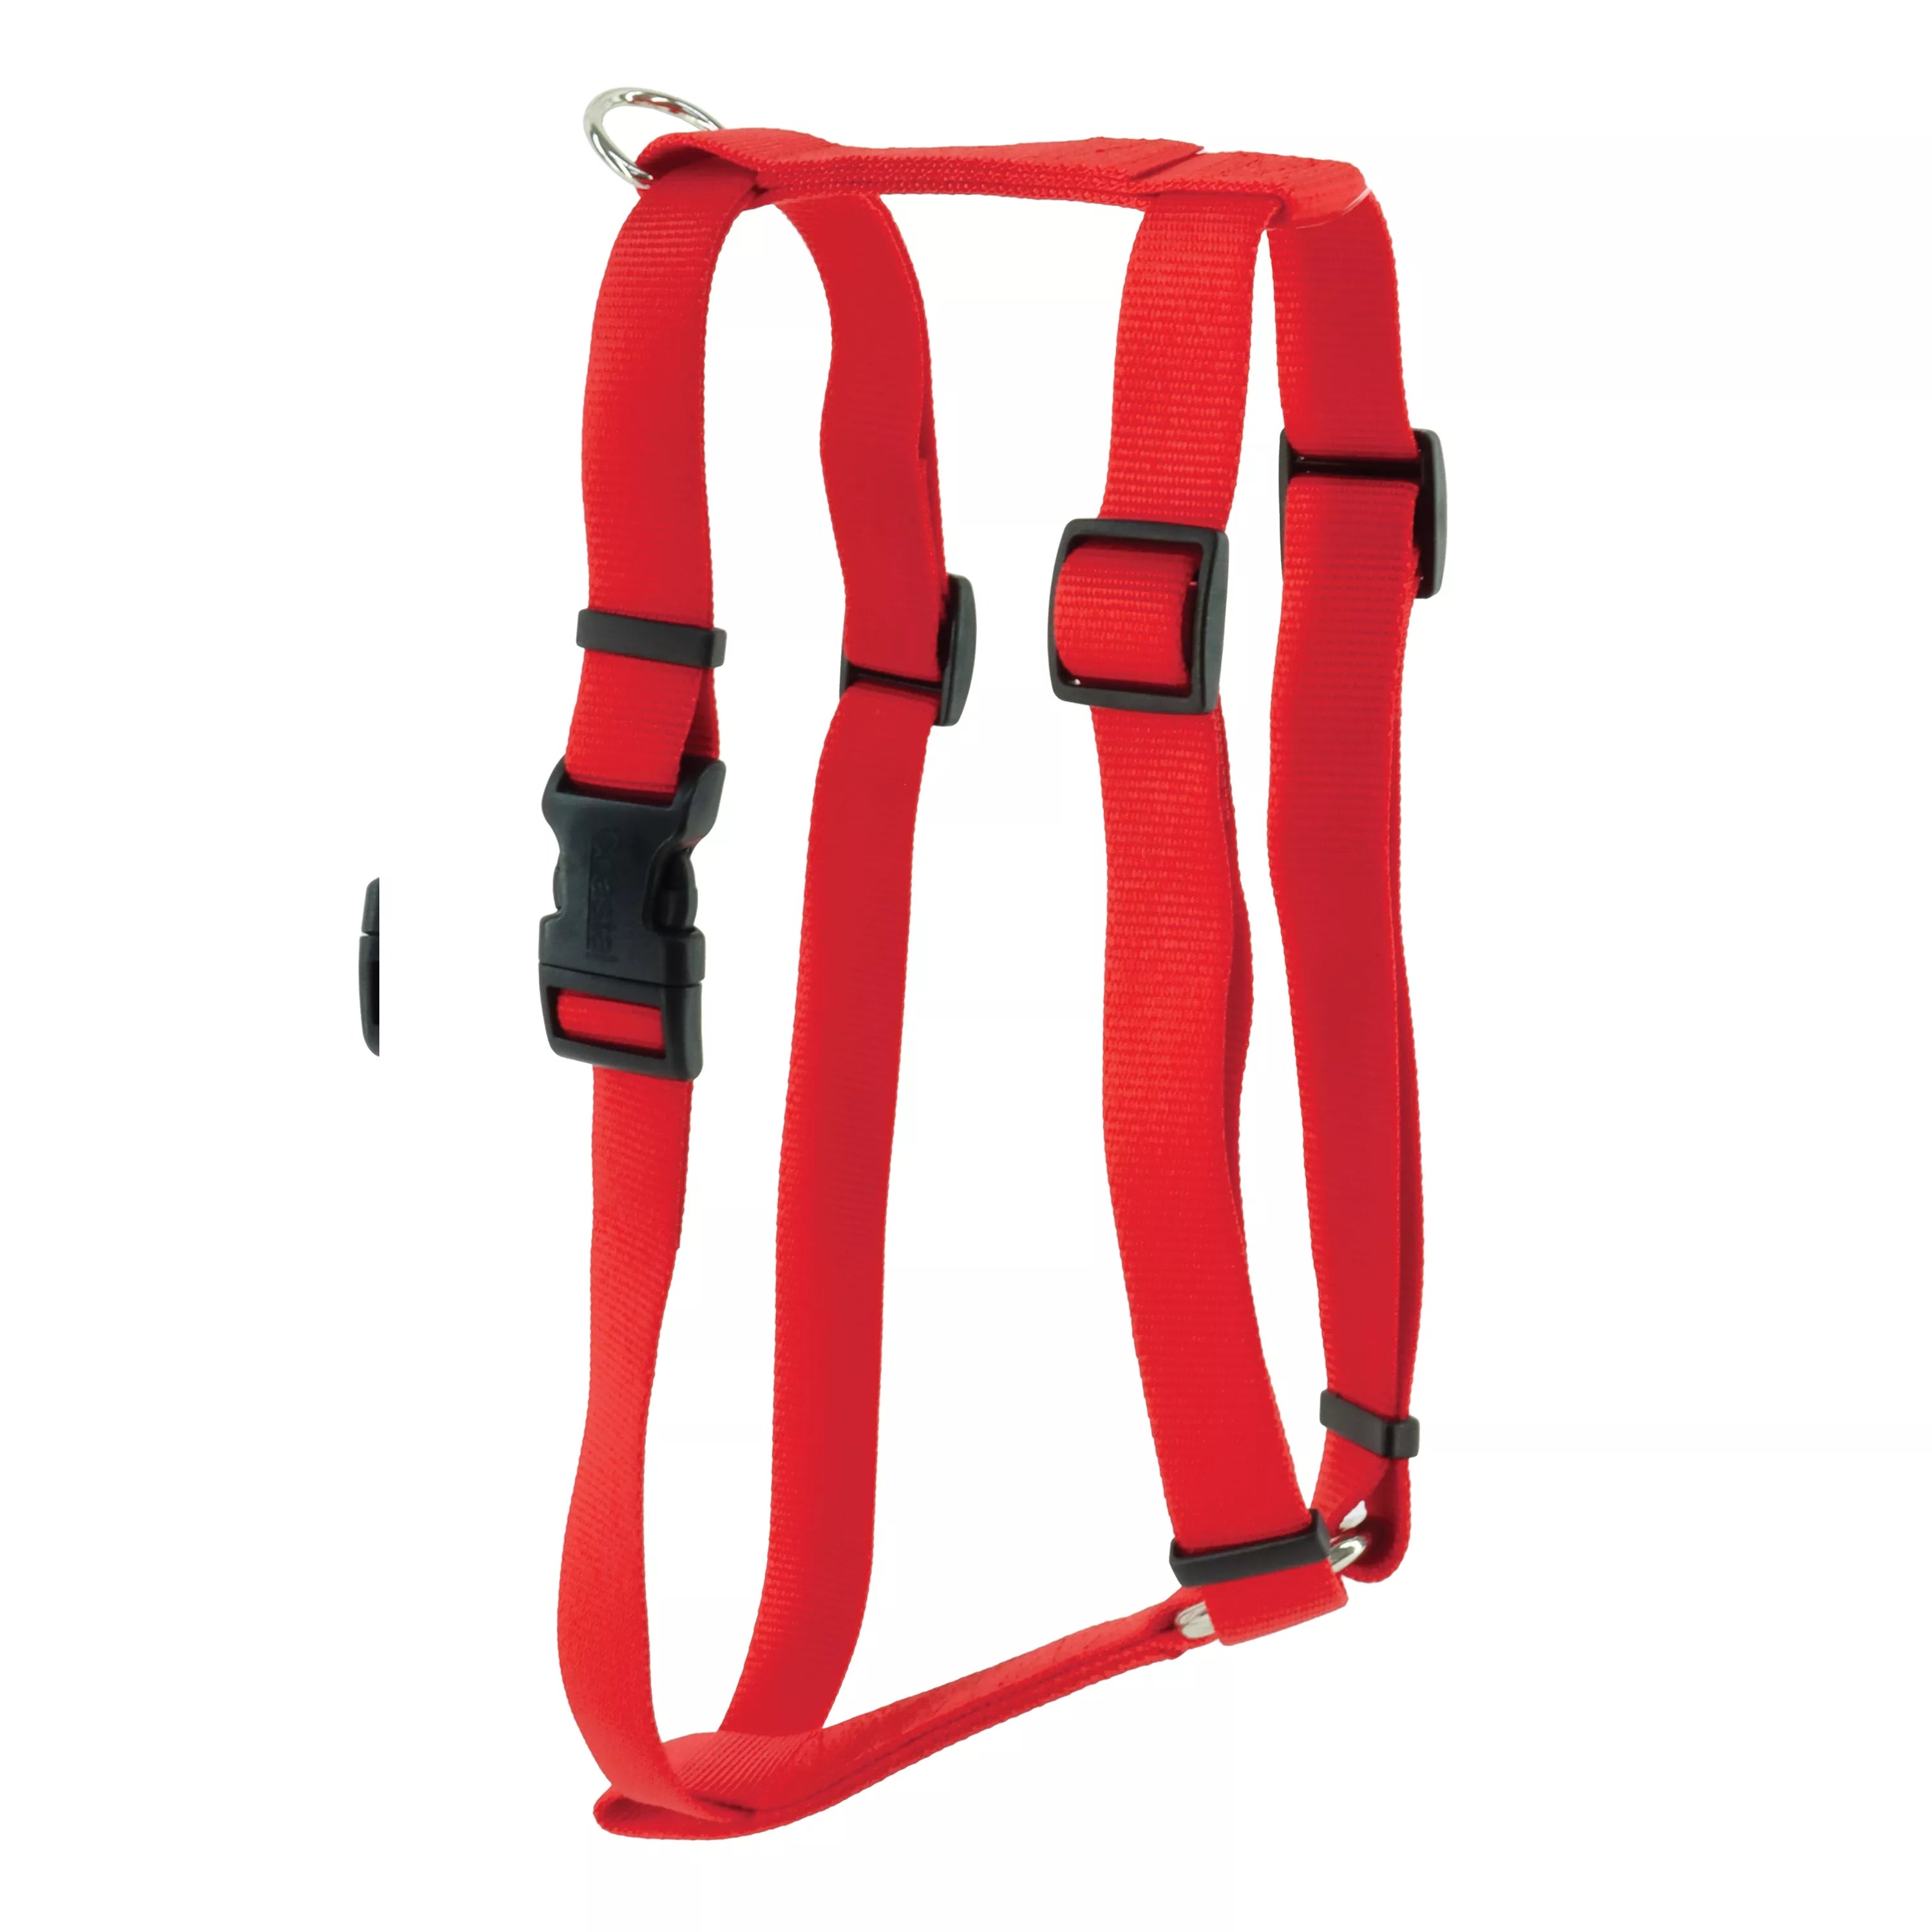 Coastal Pet Products, Coastal Pet Products Standard Adjustable Dog Harness X-Small, Red - 3/8" X 10"-18"